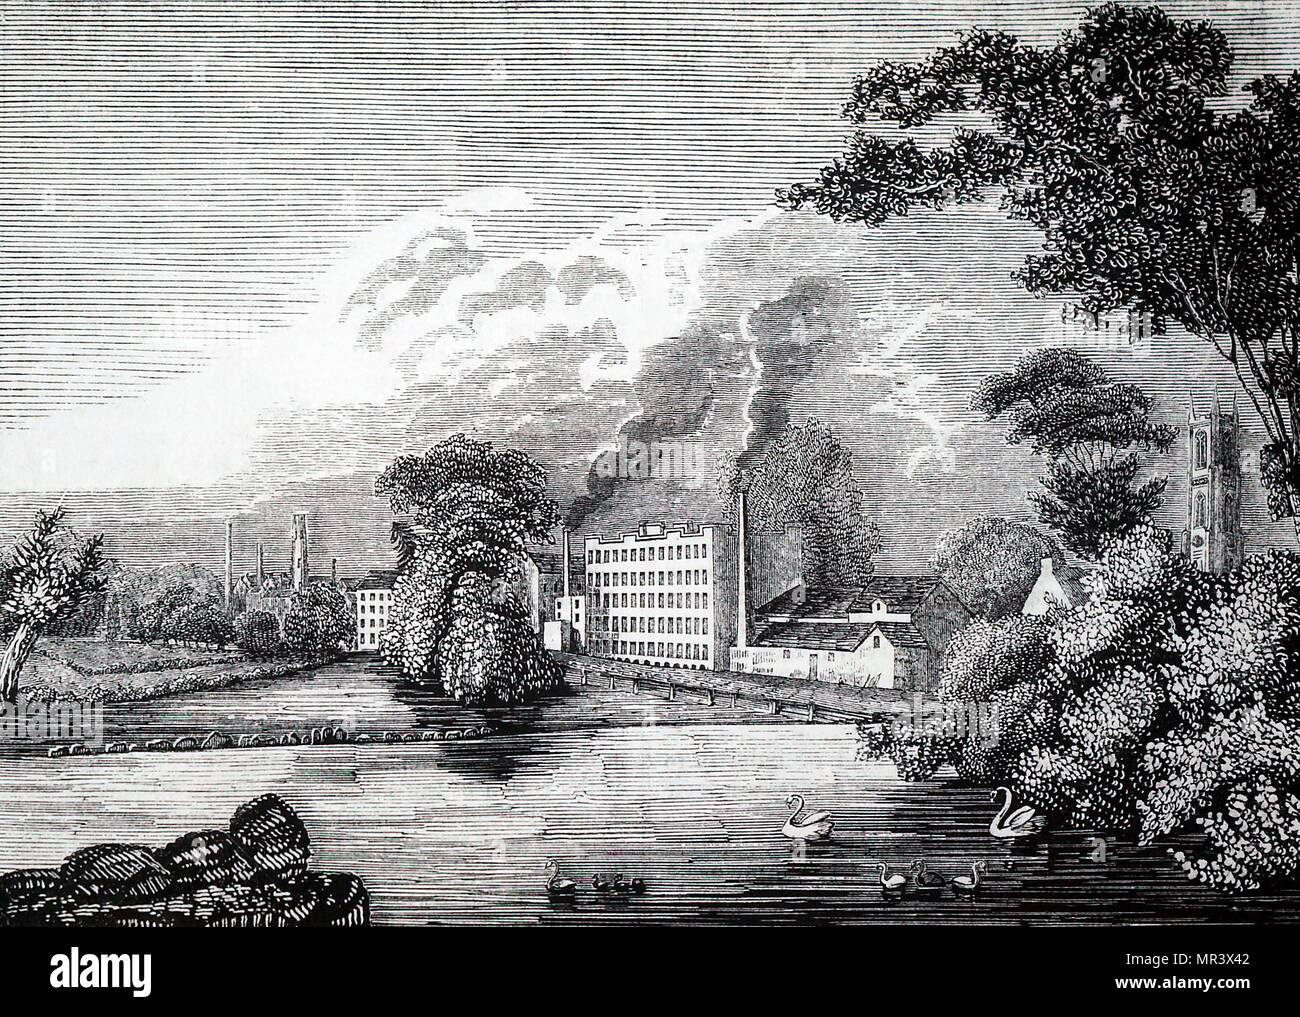 Engraving depicting Sir Thomas Lombe's silk mill on the river Derwent at Derby. This was the first water-powered textile mill in Britain (circa. 1720) and preceded Arkwright's by 50 years. Thomas Lombe (1685-1739) an English merchant and developer of machinery for silk throwing. Dated 19th century Stock Photo